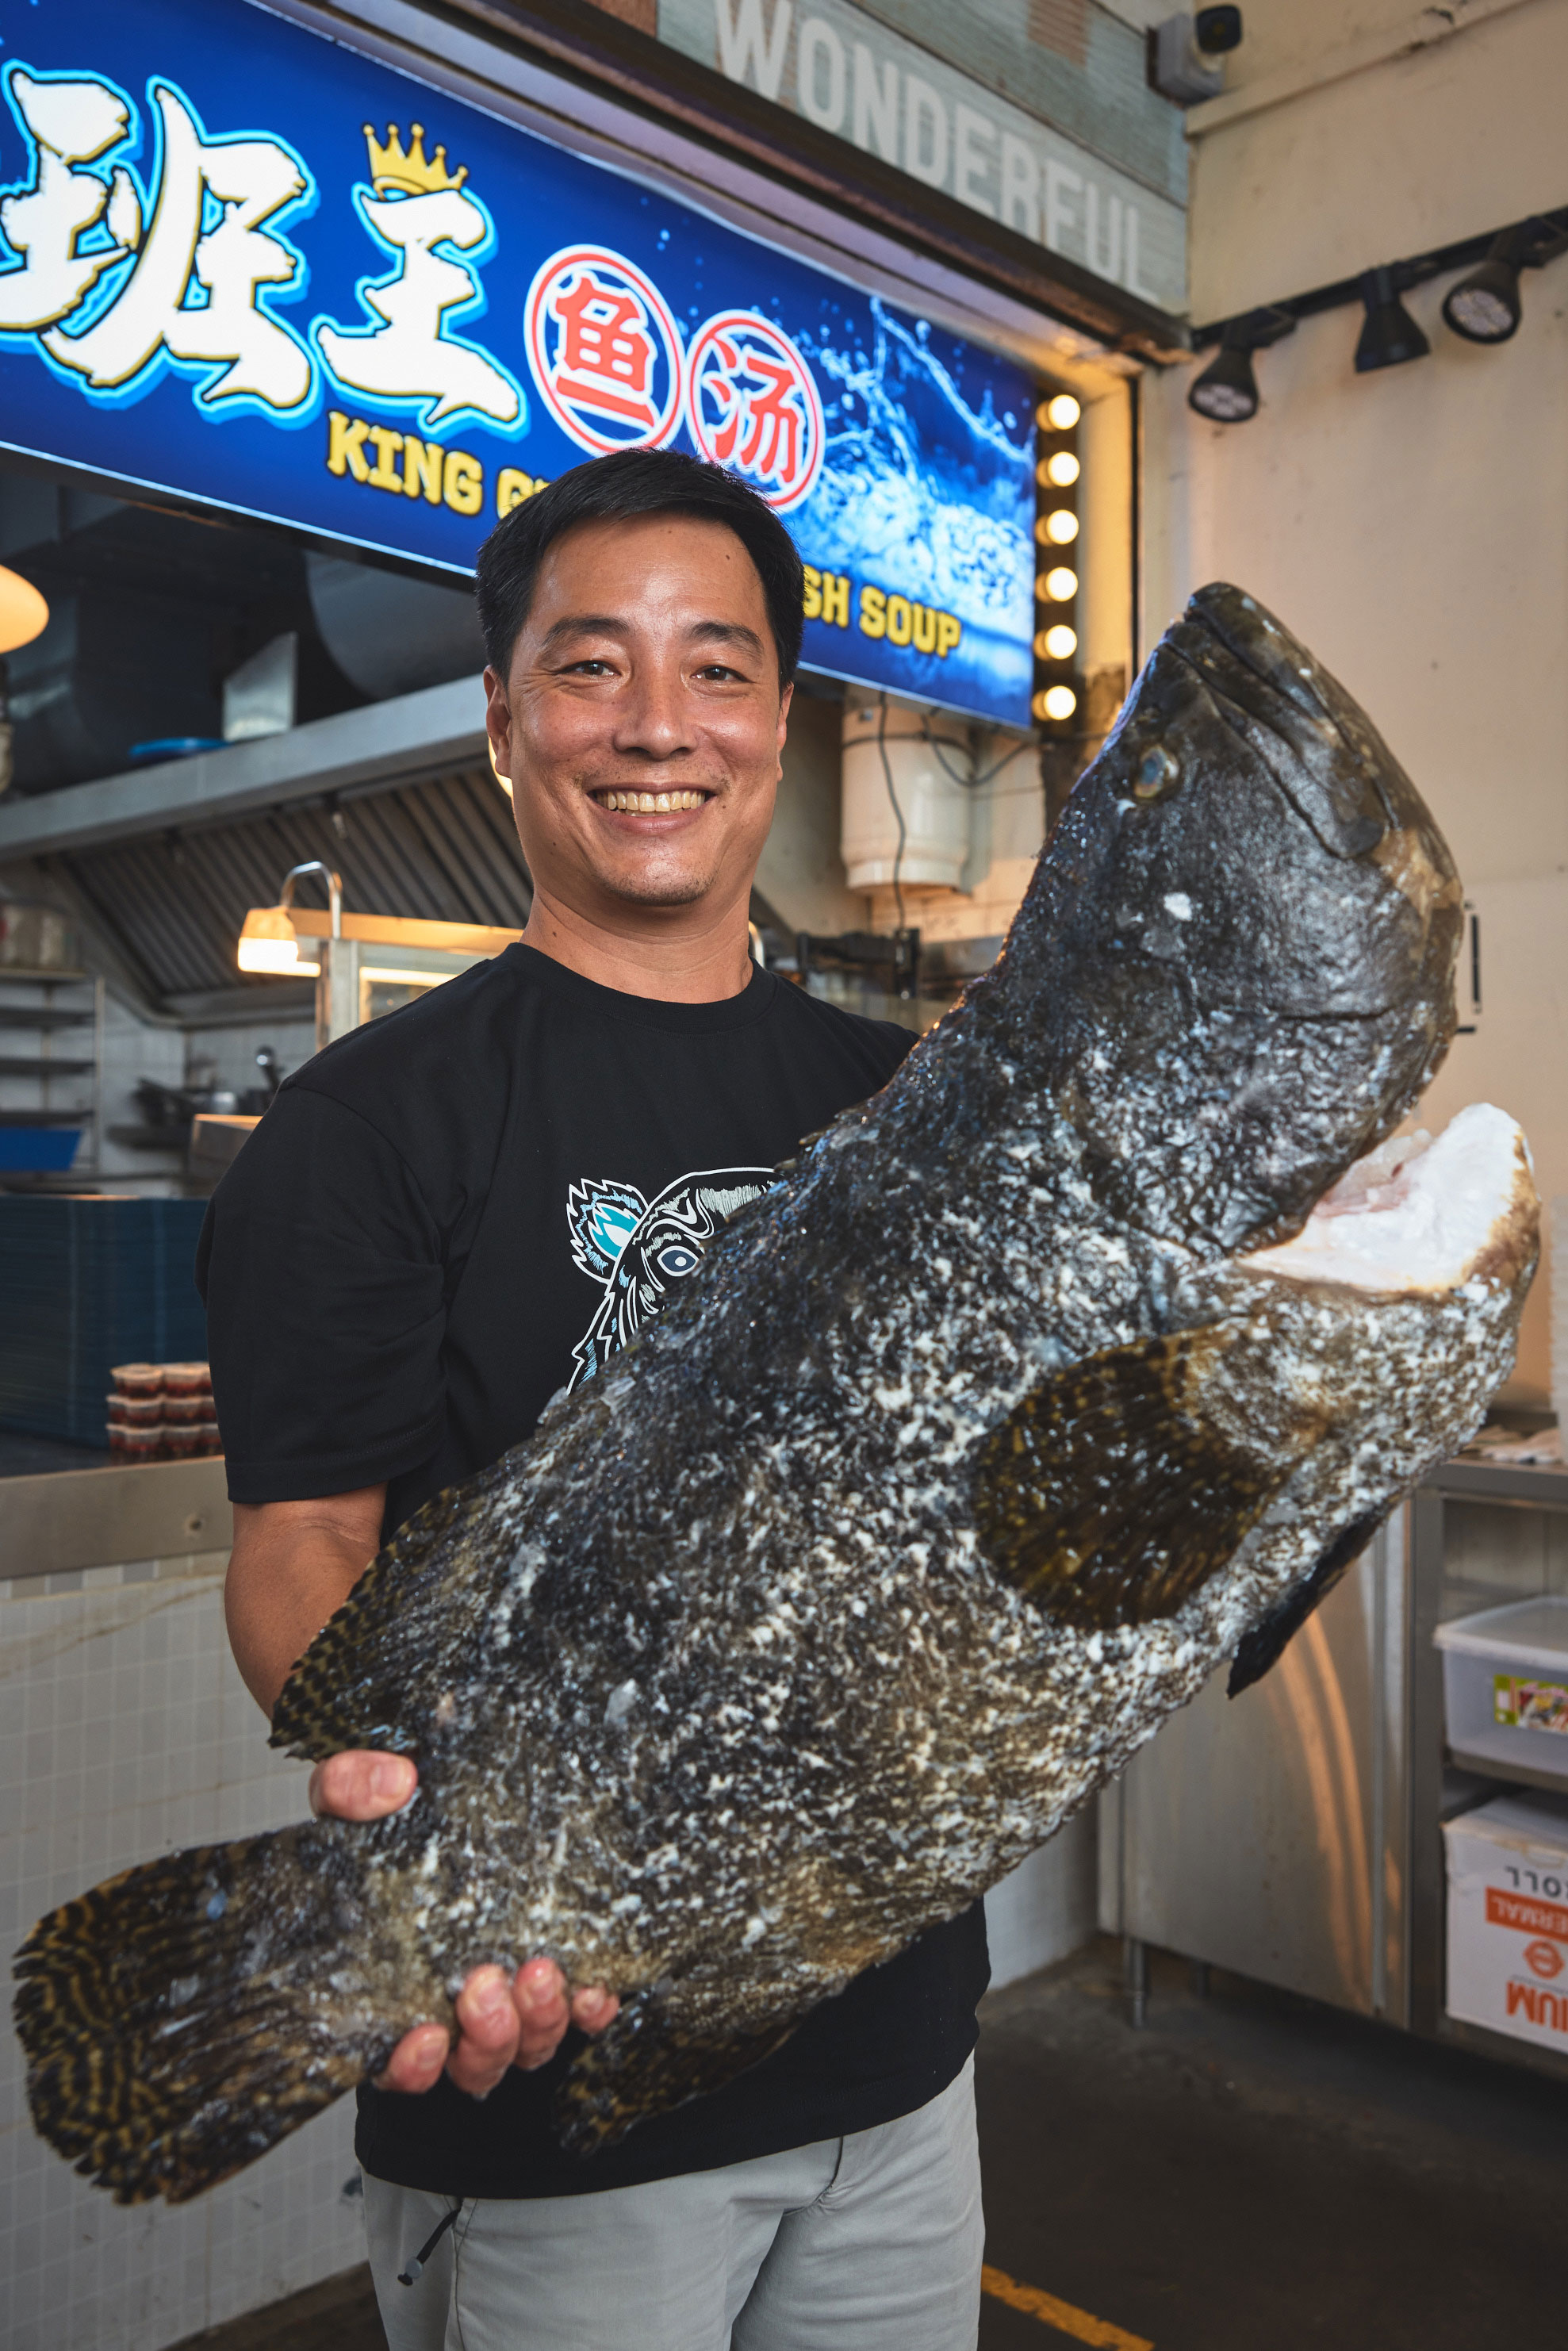 What is a giant grouper?